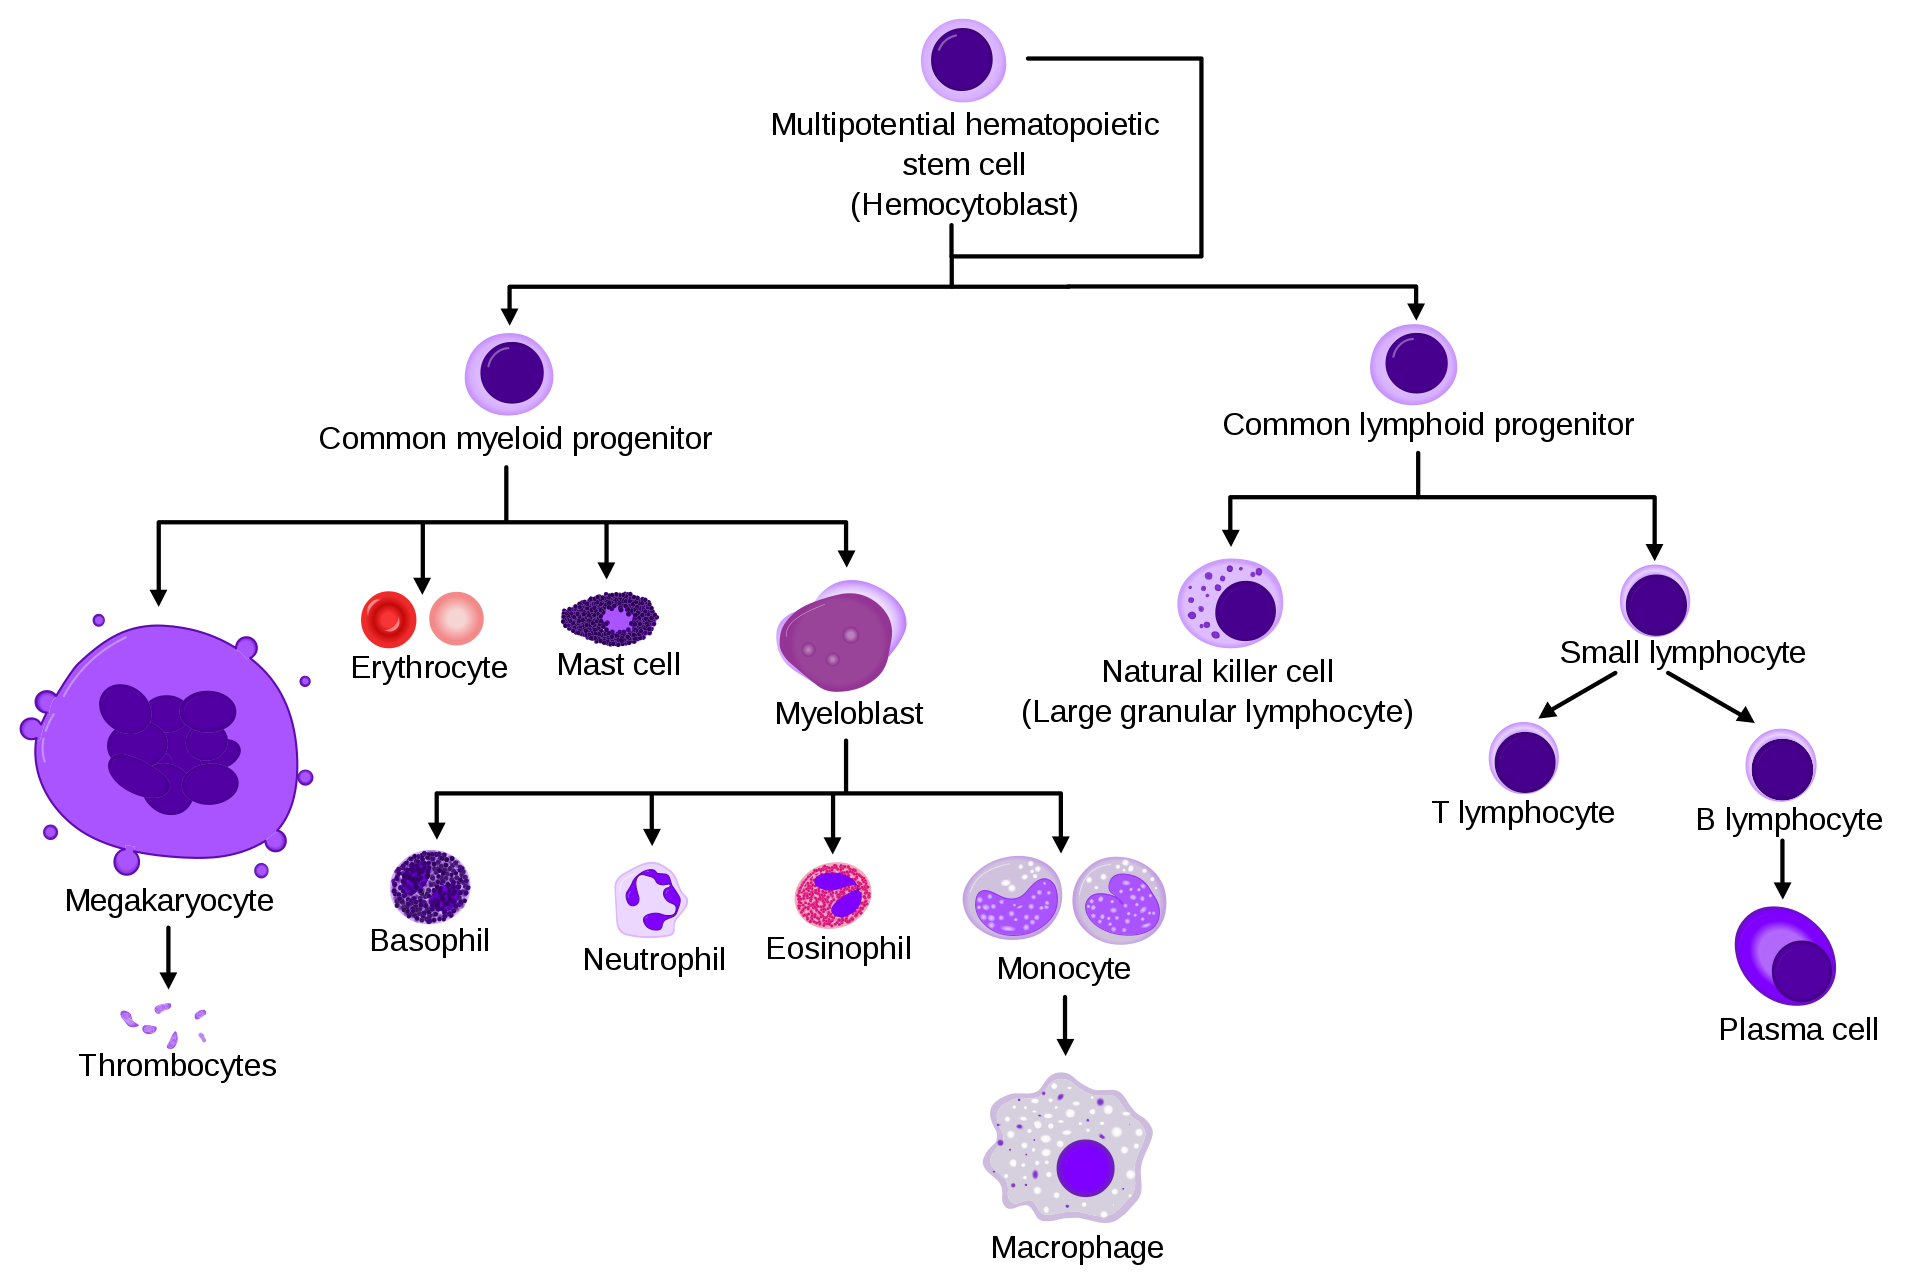 Diagram showing the blood cell family tree